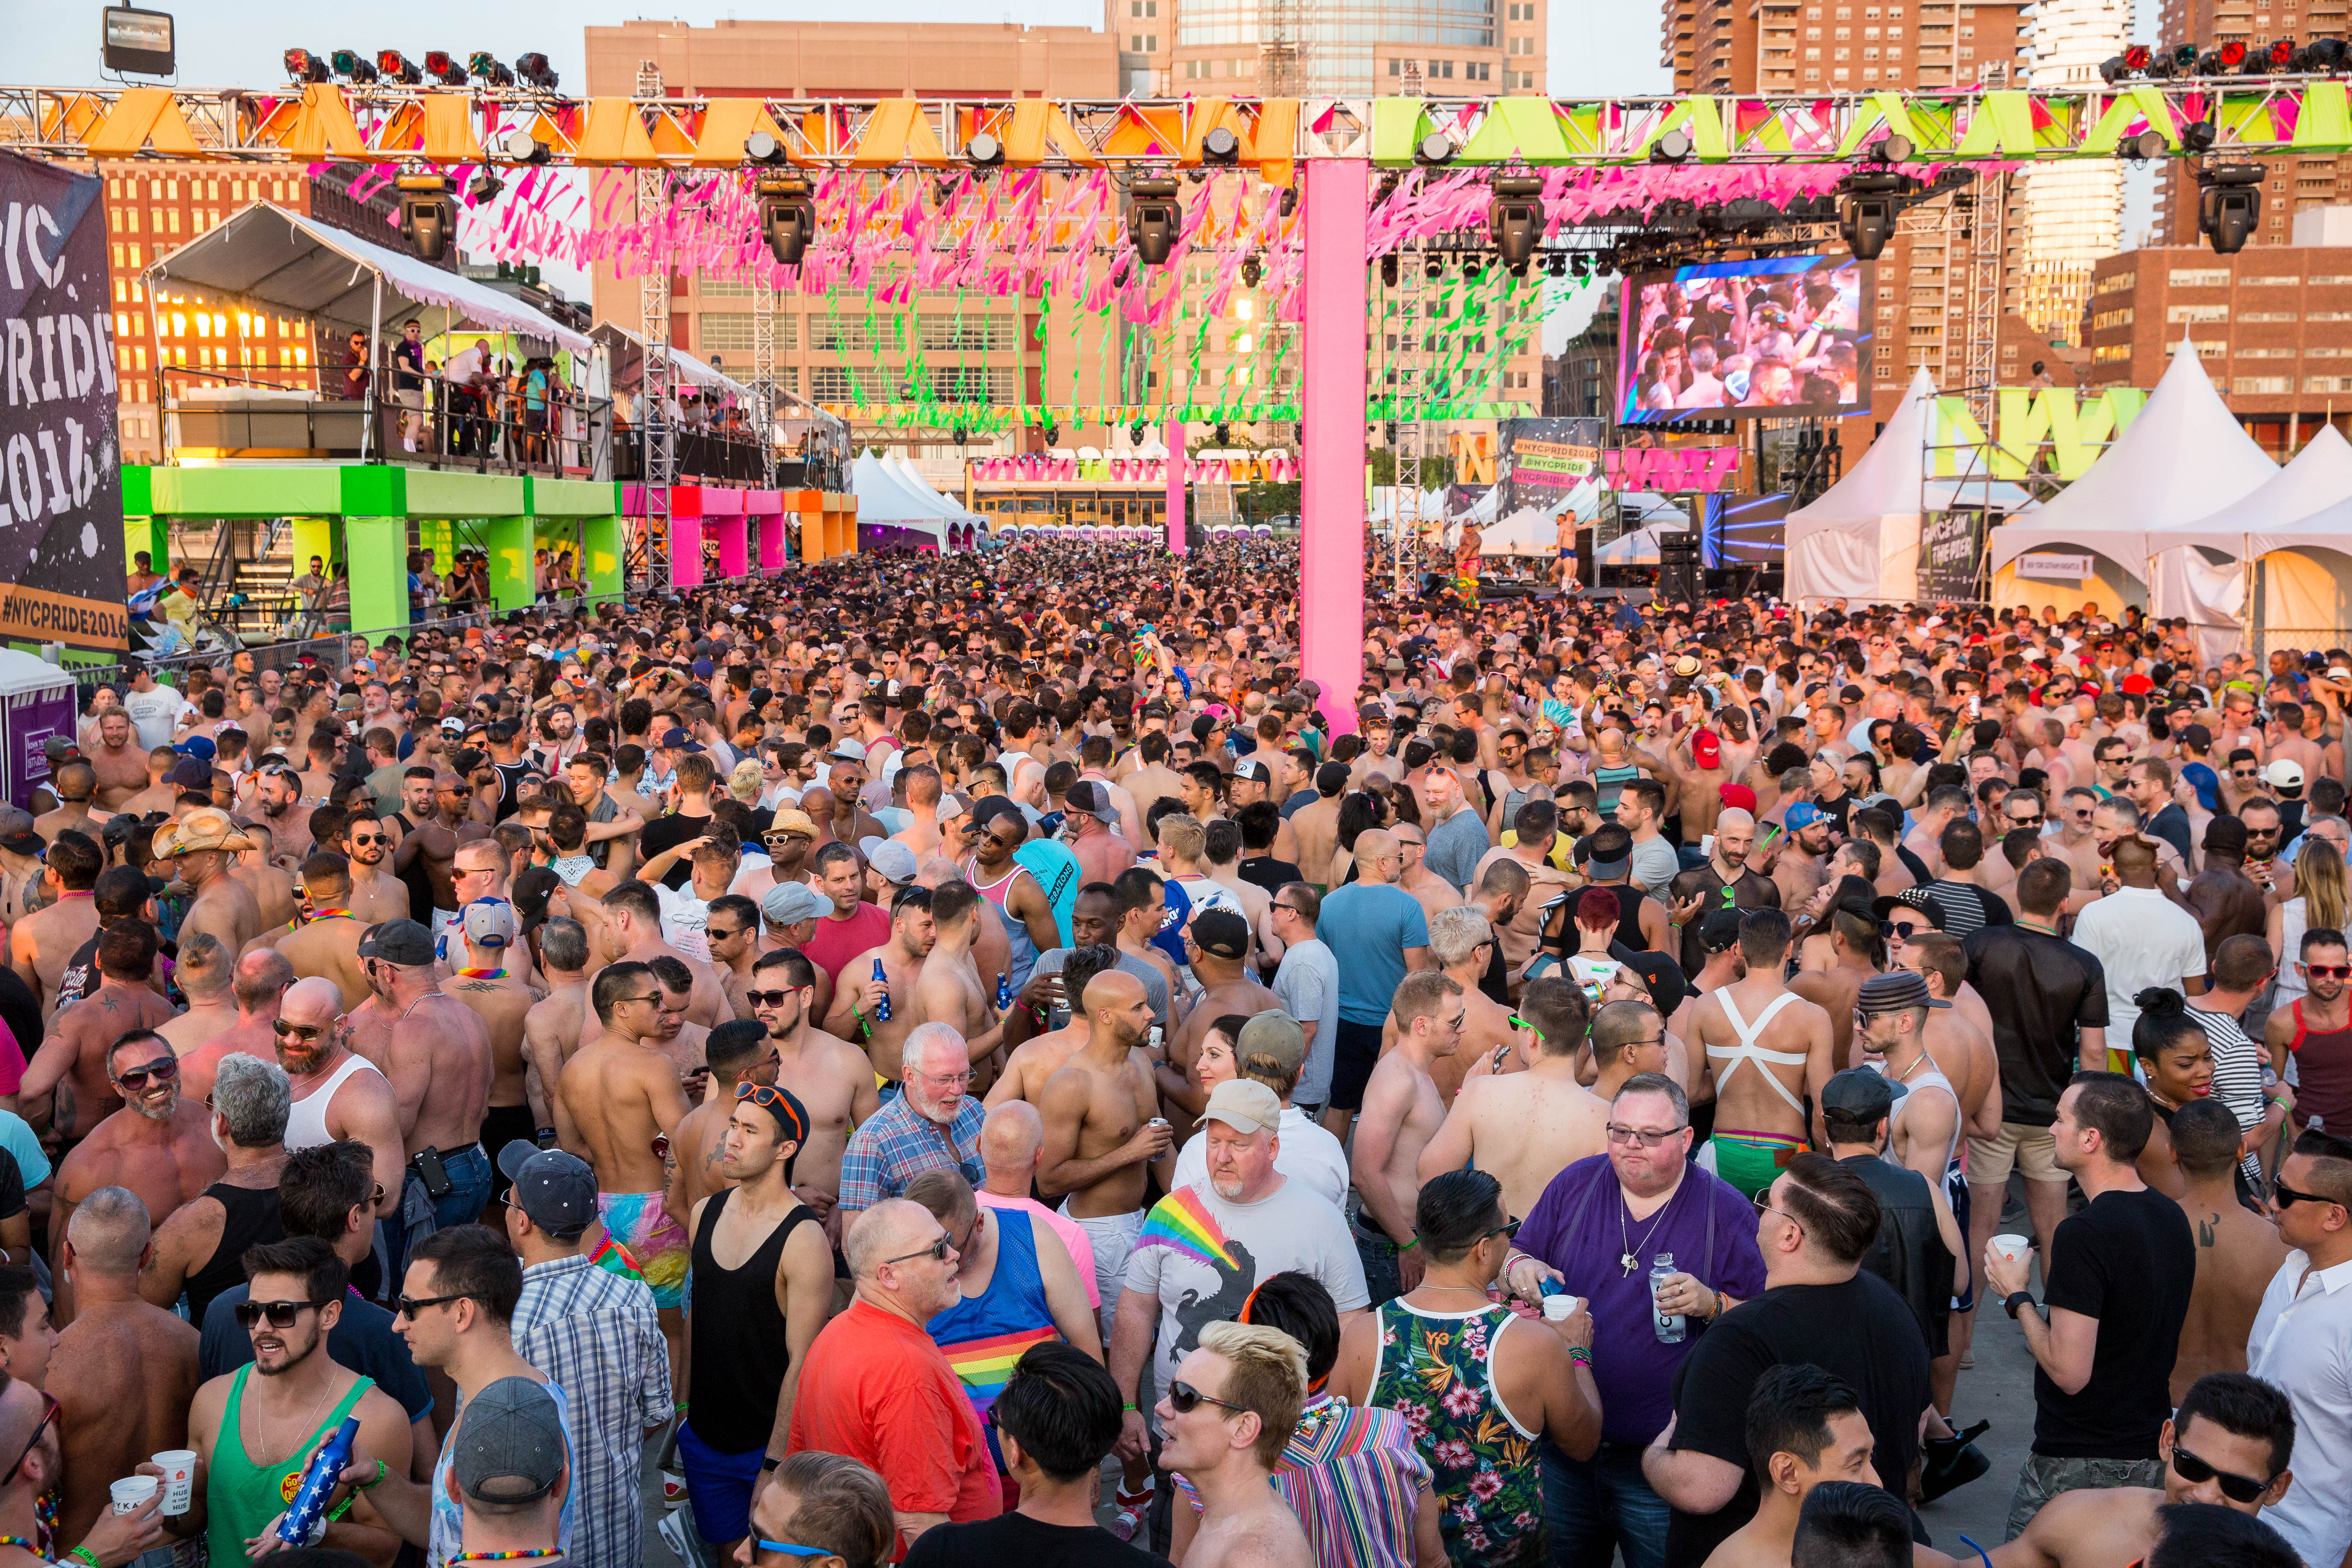 Here's What You Missed at NYC Pride's Dance On The Pier